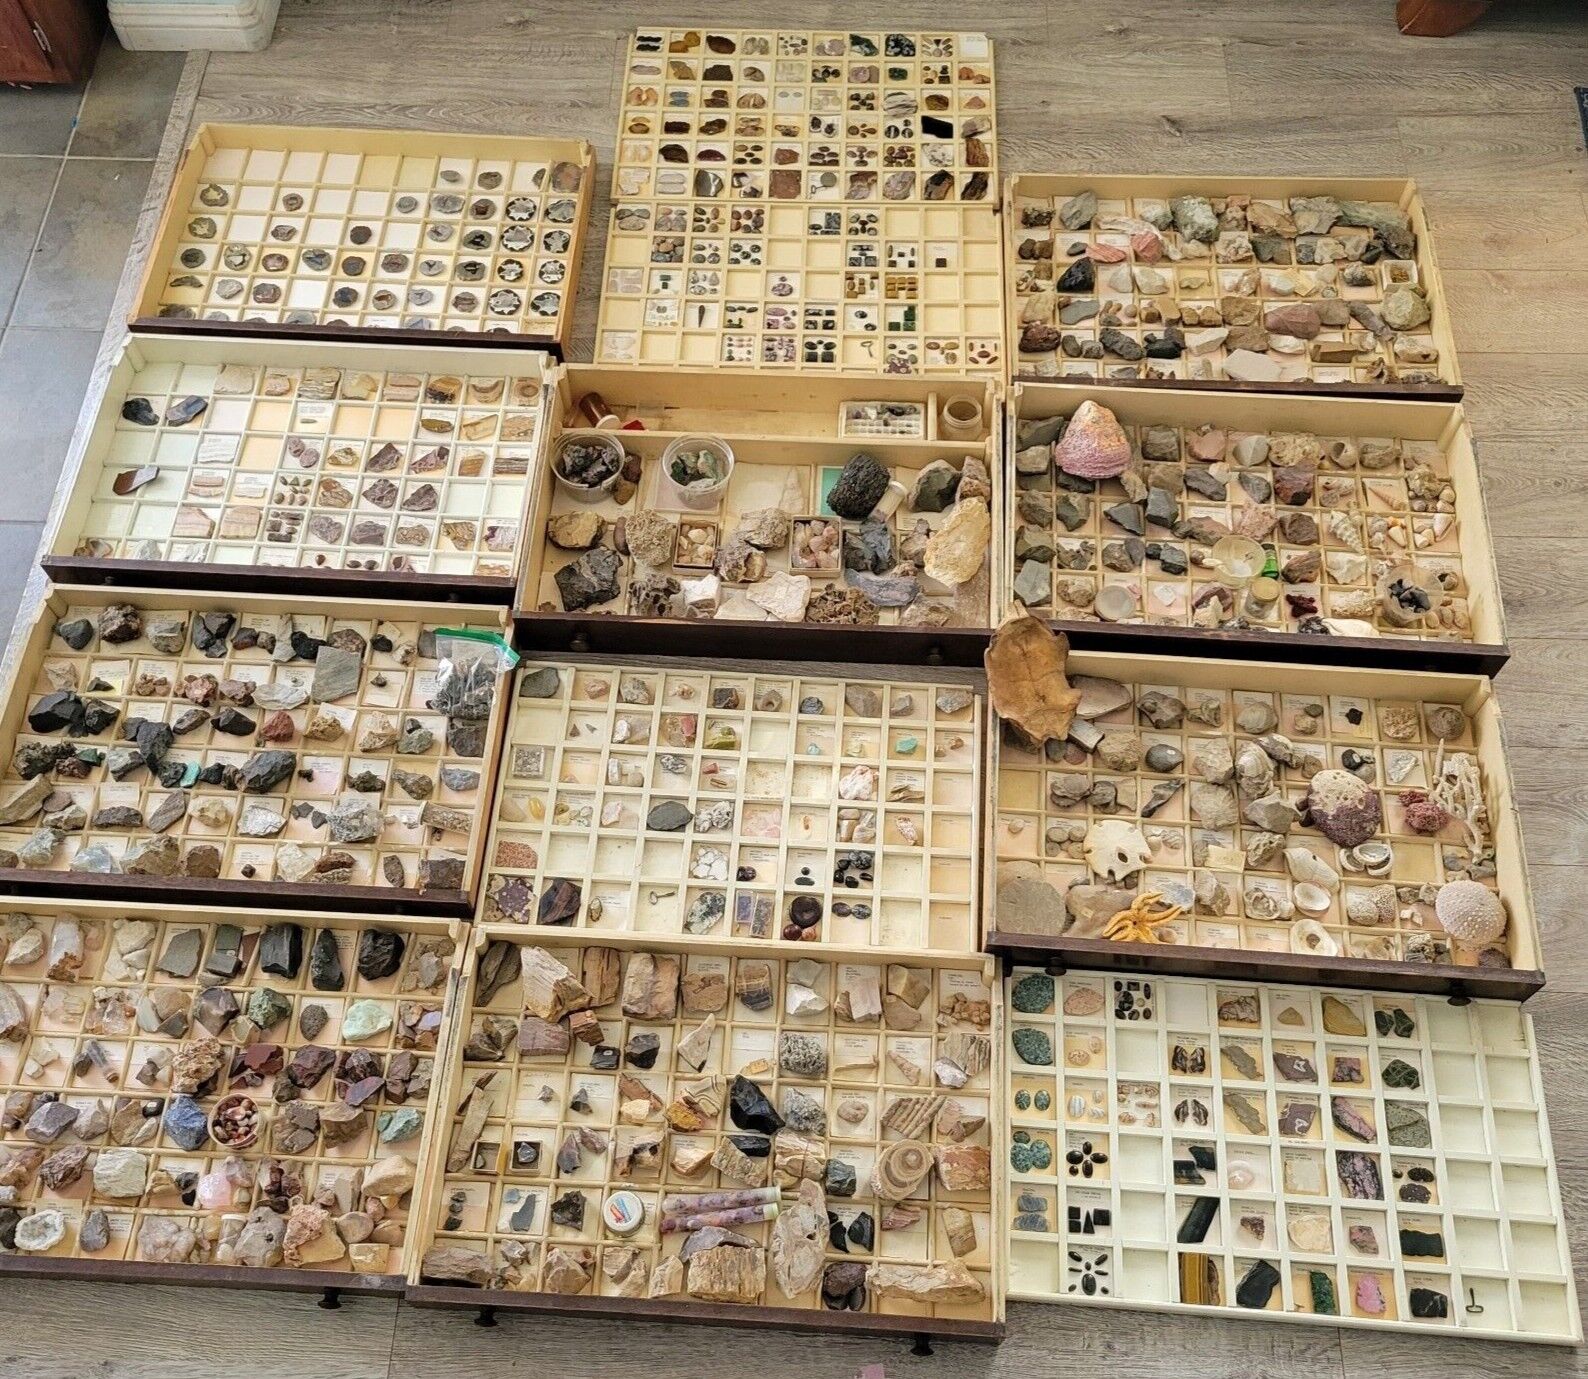 Huge Gem/mineral/ Fossil/Jewelry stone/meteorite/gold & silver ore collection 